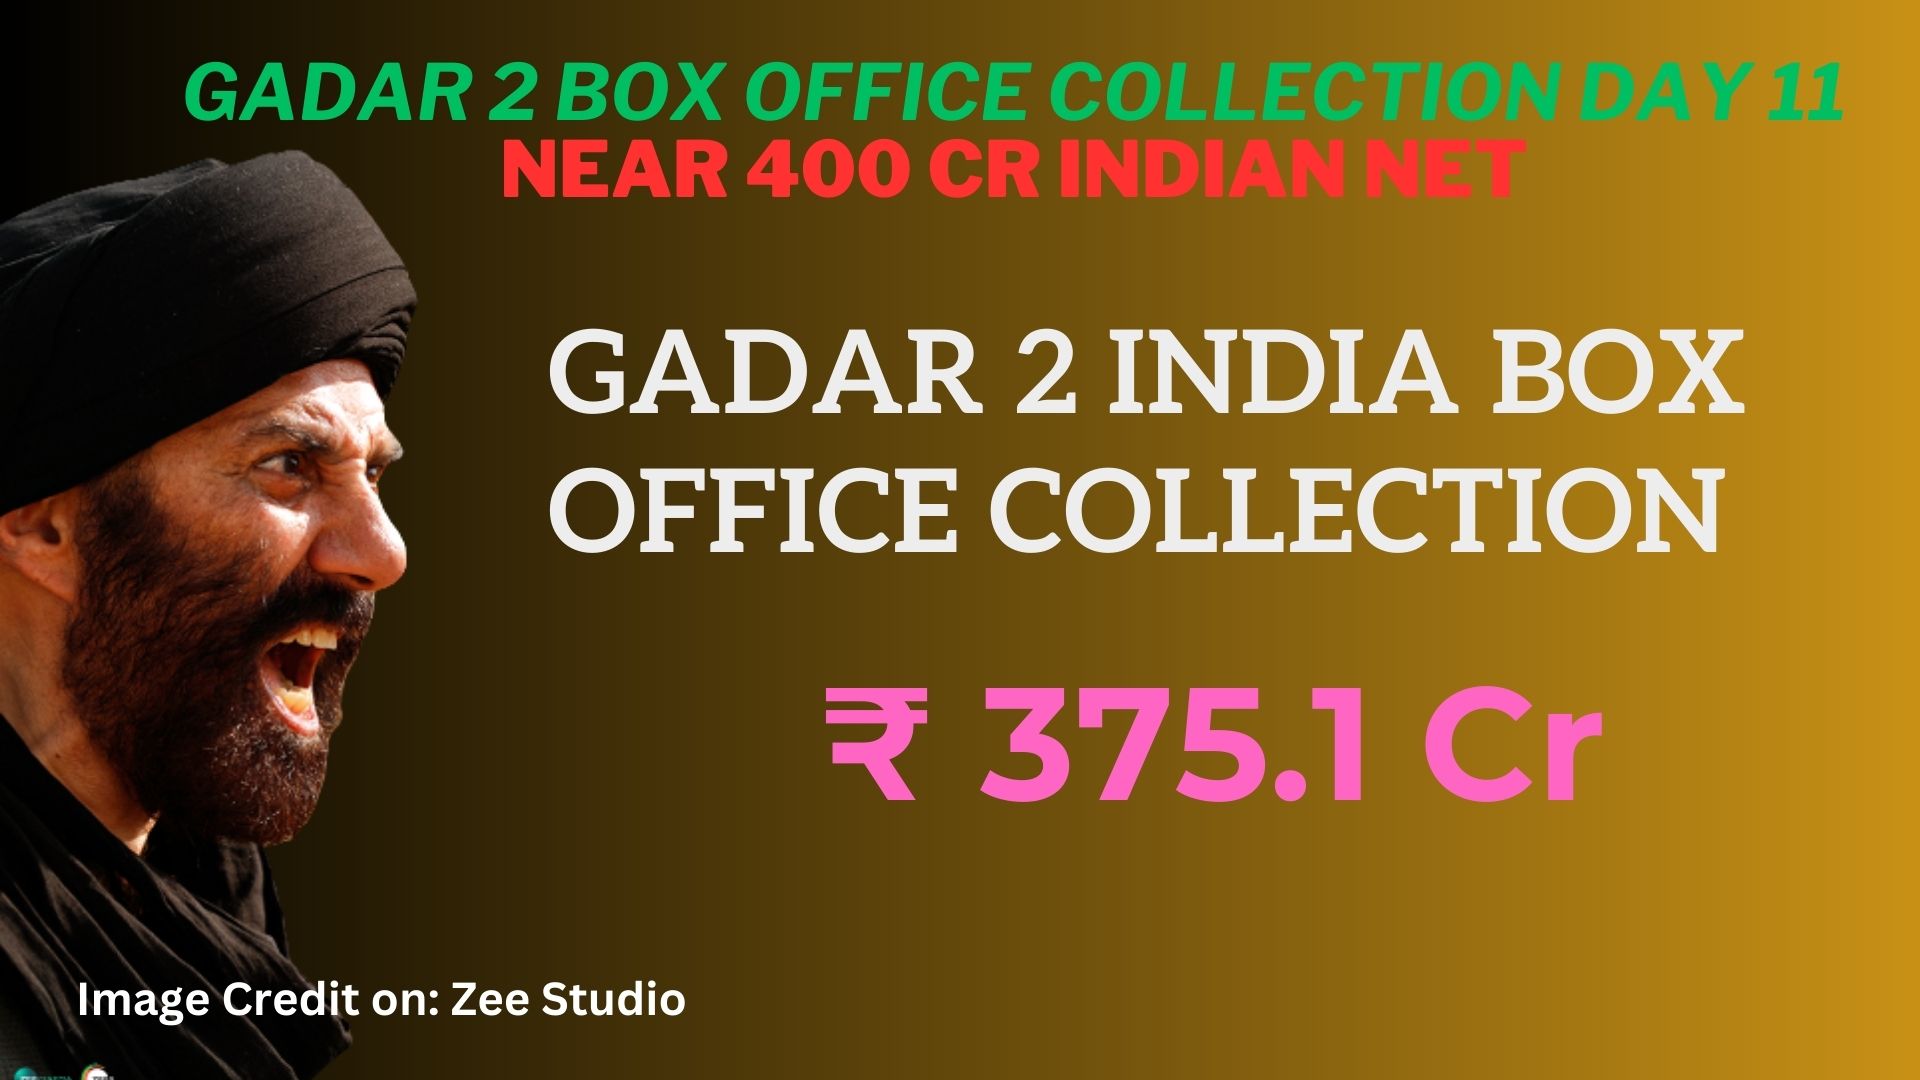 Gadar 2 may soon cross the 400 crore mark at the India box office collection